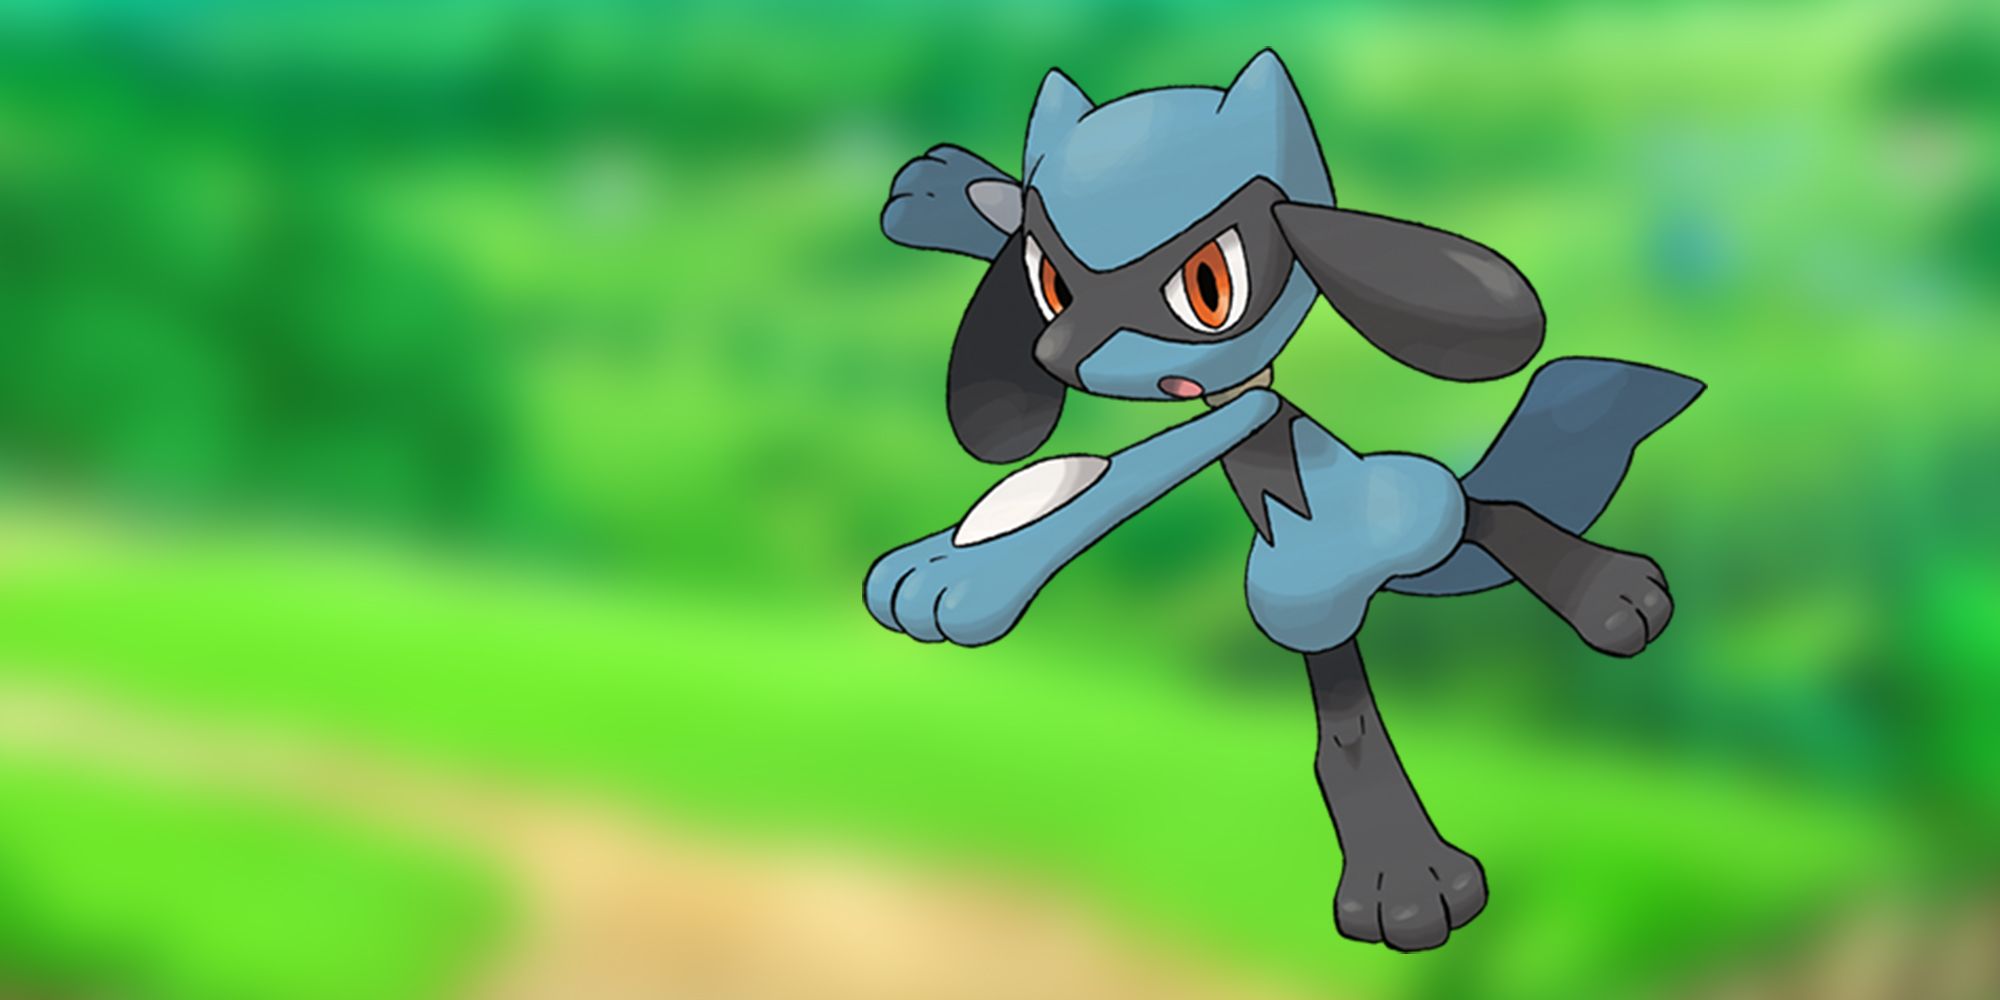 Riolu Posed Over a Blurred Background